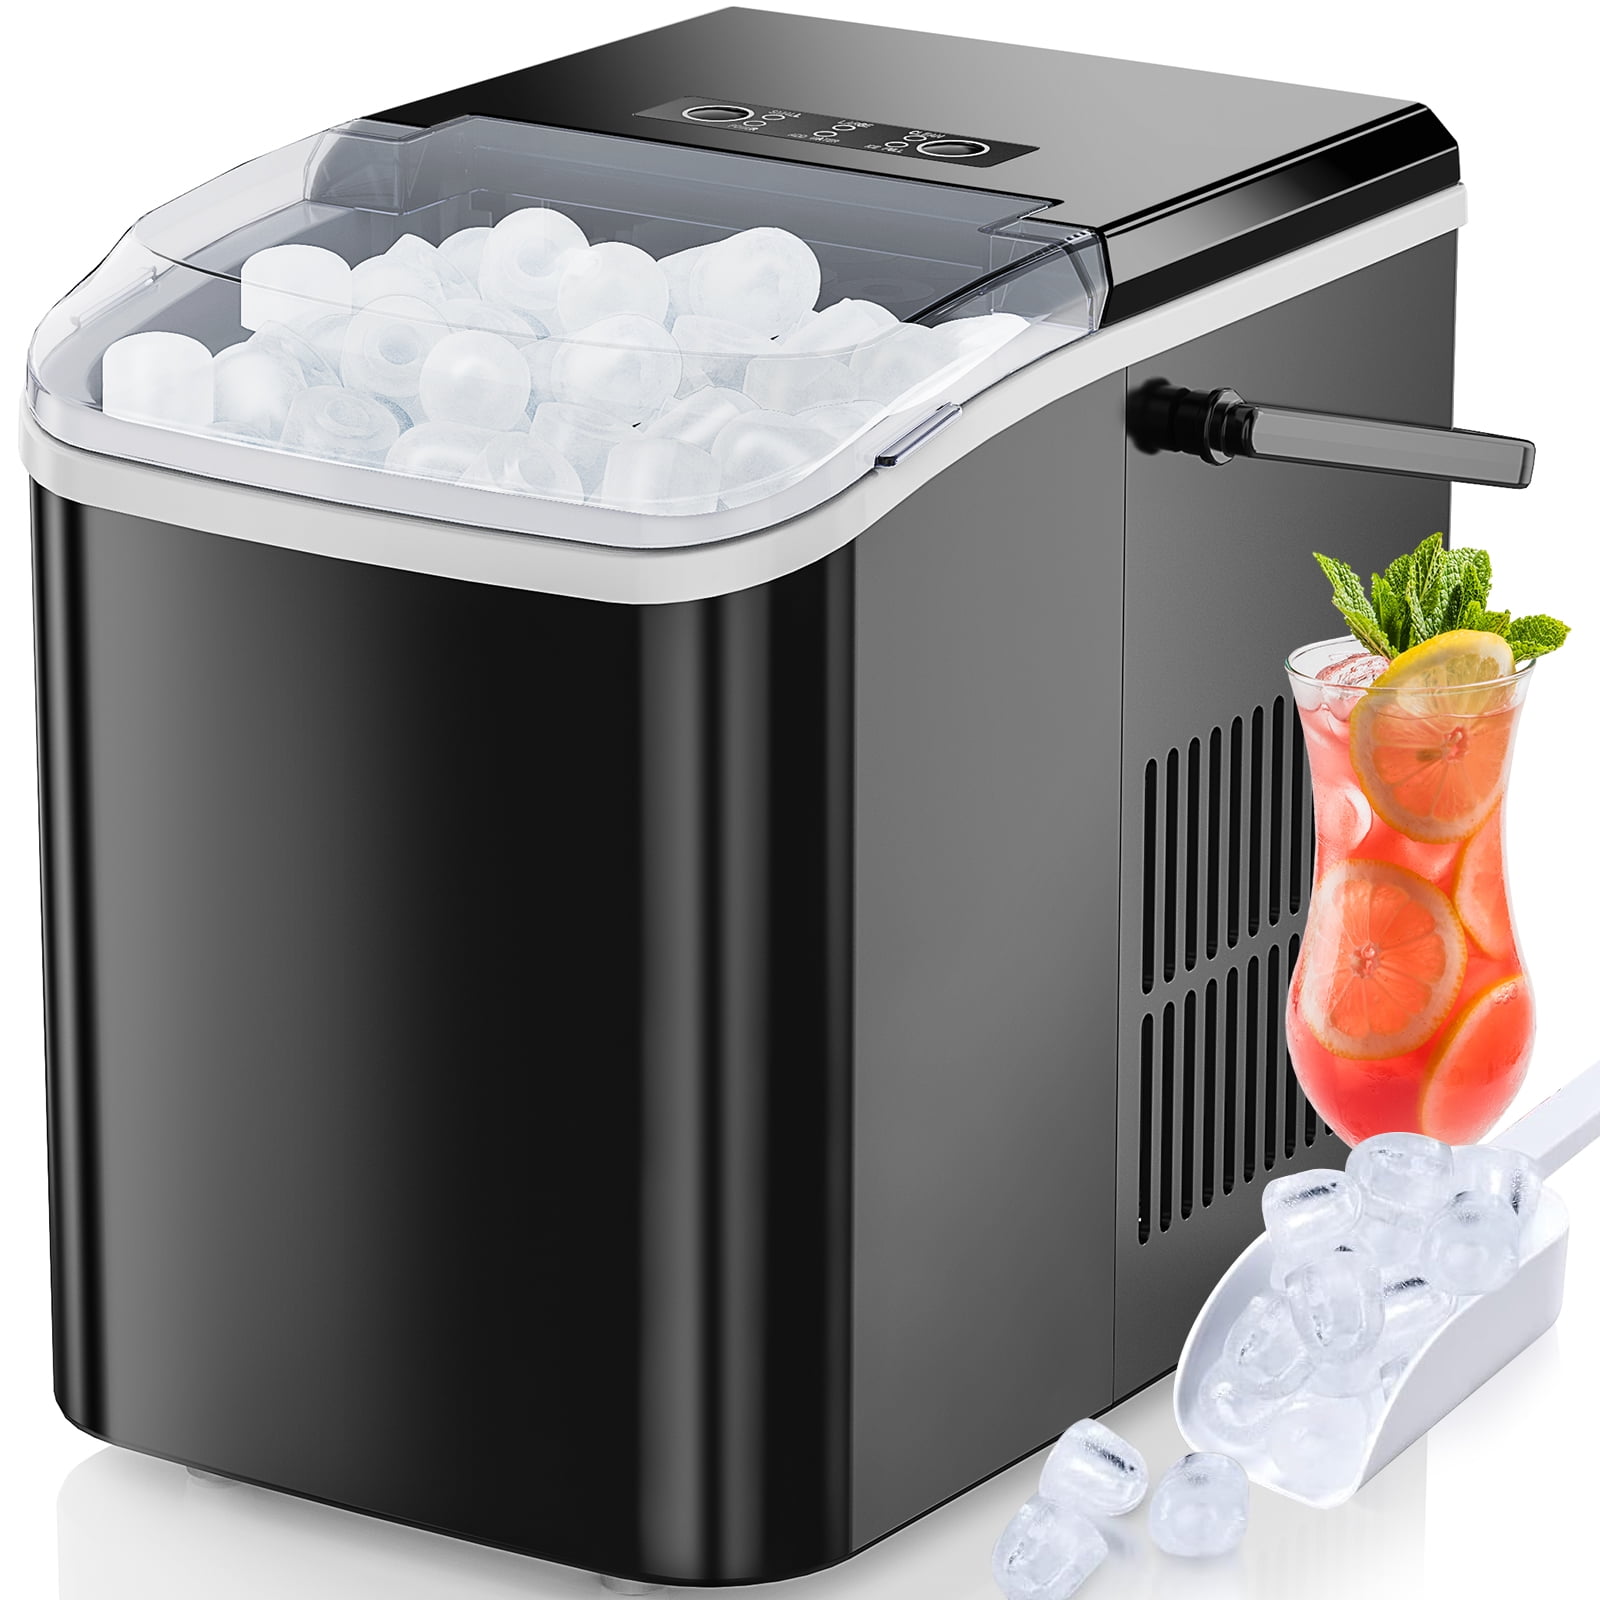 EDX Countertop Ice Maker, Self-Cleaning Portable Ice Maker Machine with  Handle and Ice Scoop, Bullet Ice Cubes, 9Pcs/6Min 26.5Lbs/24H for